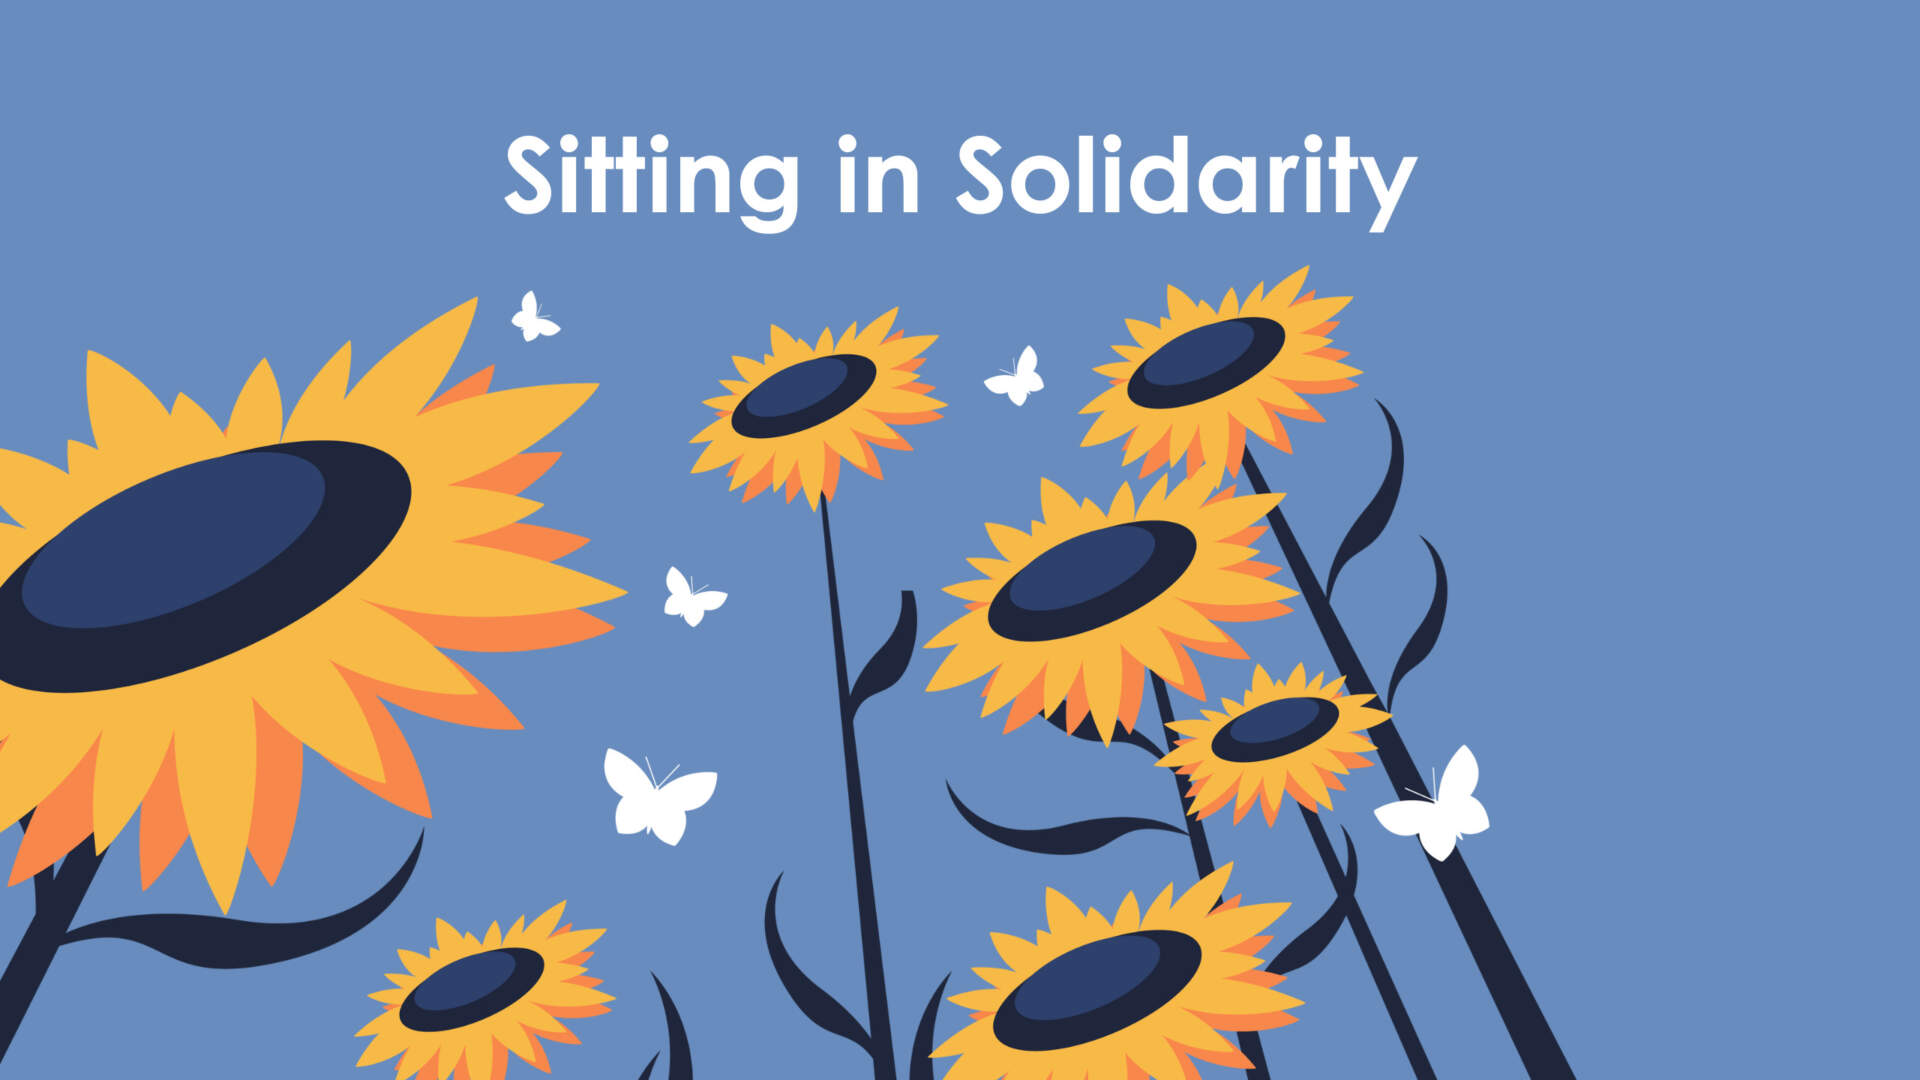 Illustrated sunflowers with butterflies and text that says "Sitting in Solidarity"